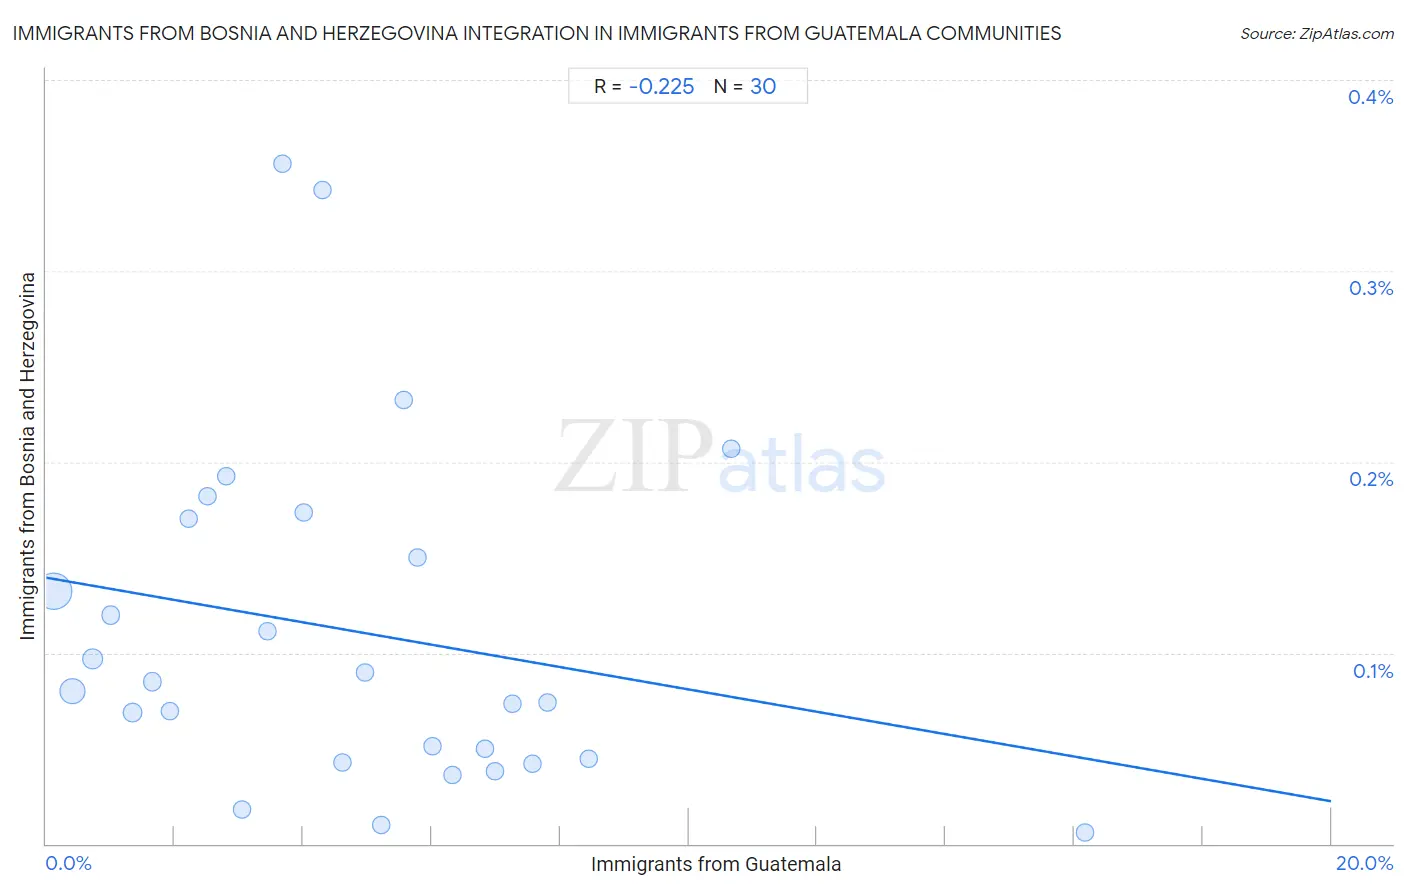 Immigrants from Guatemala Integration in Immigrants from Bosnia and Herzegovina Communities